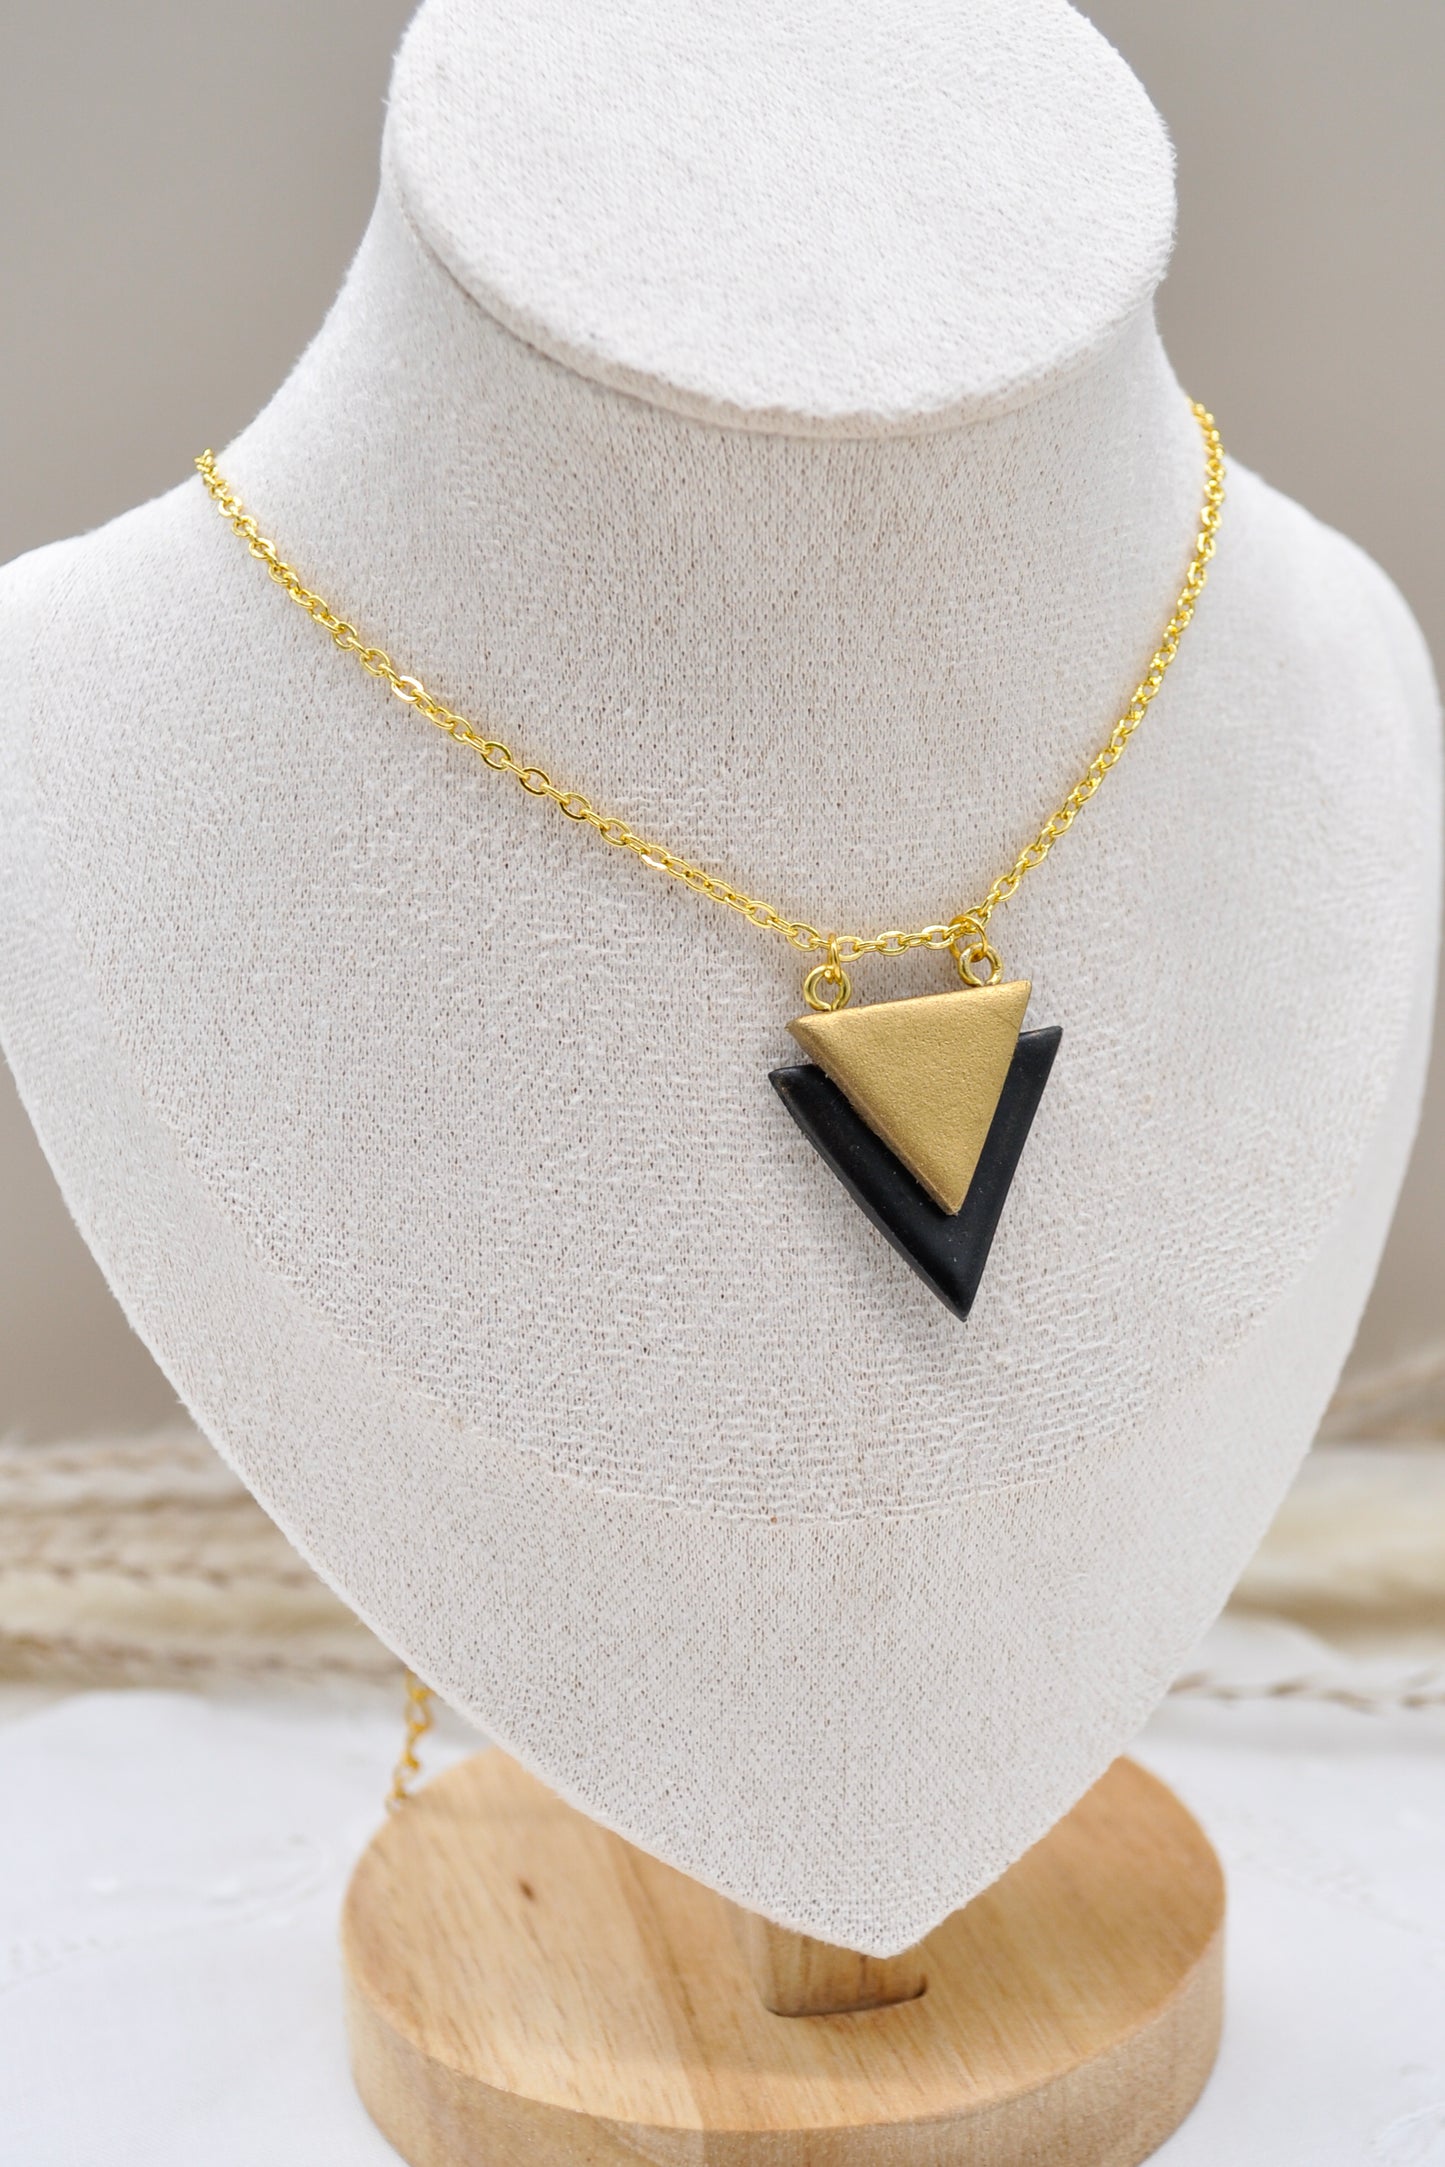 Black & Gold Triangle Necklace